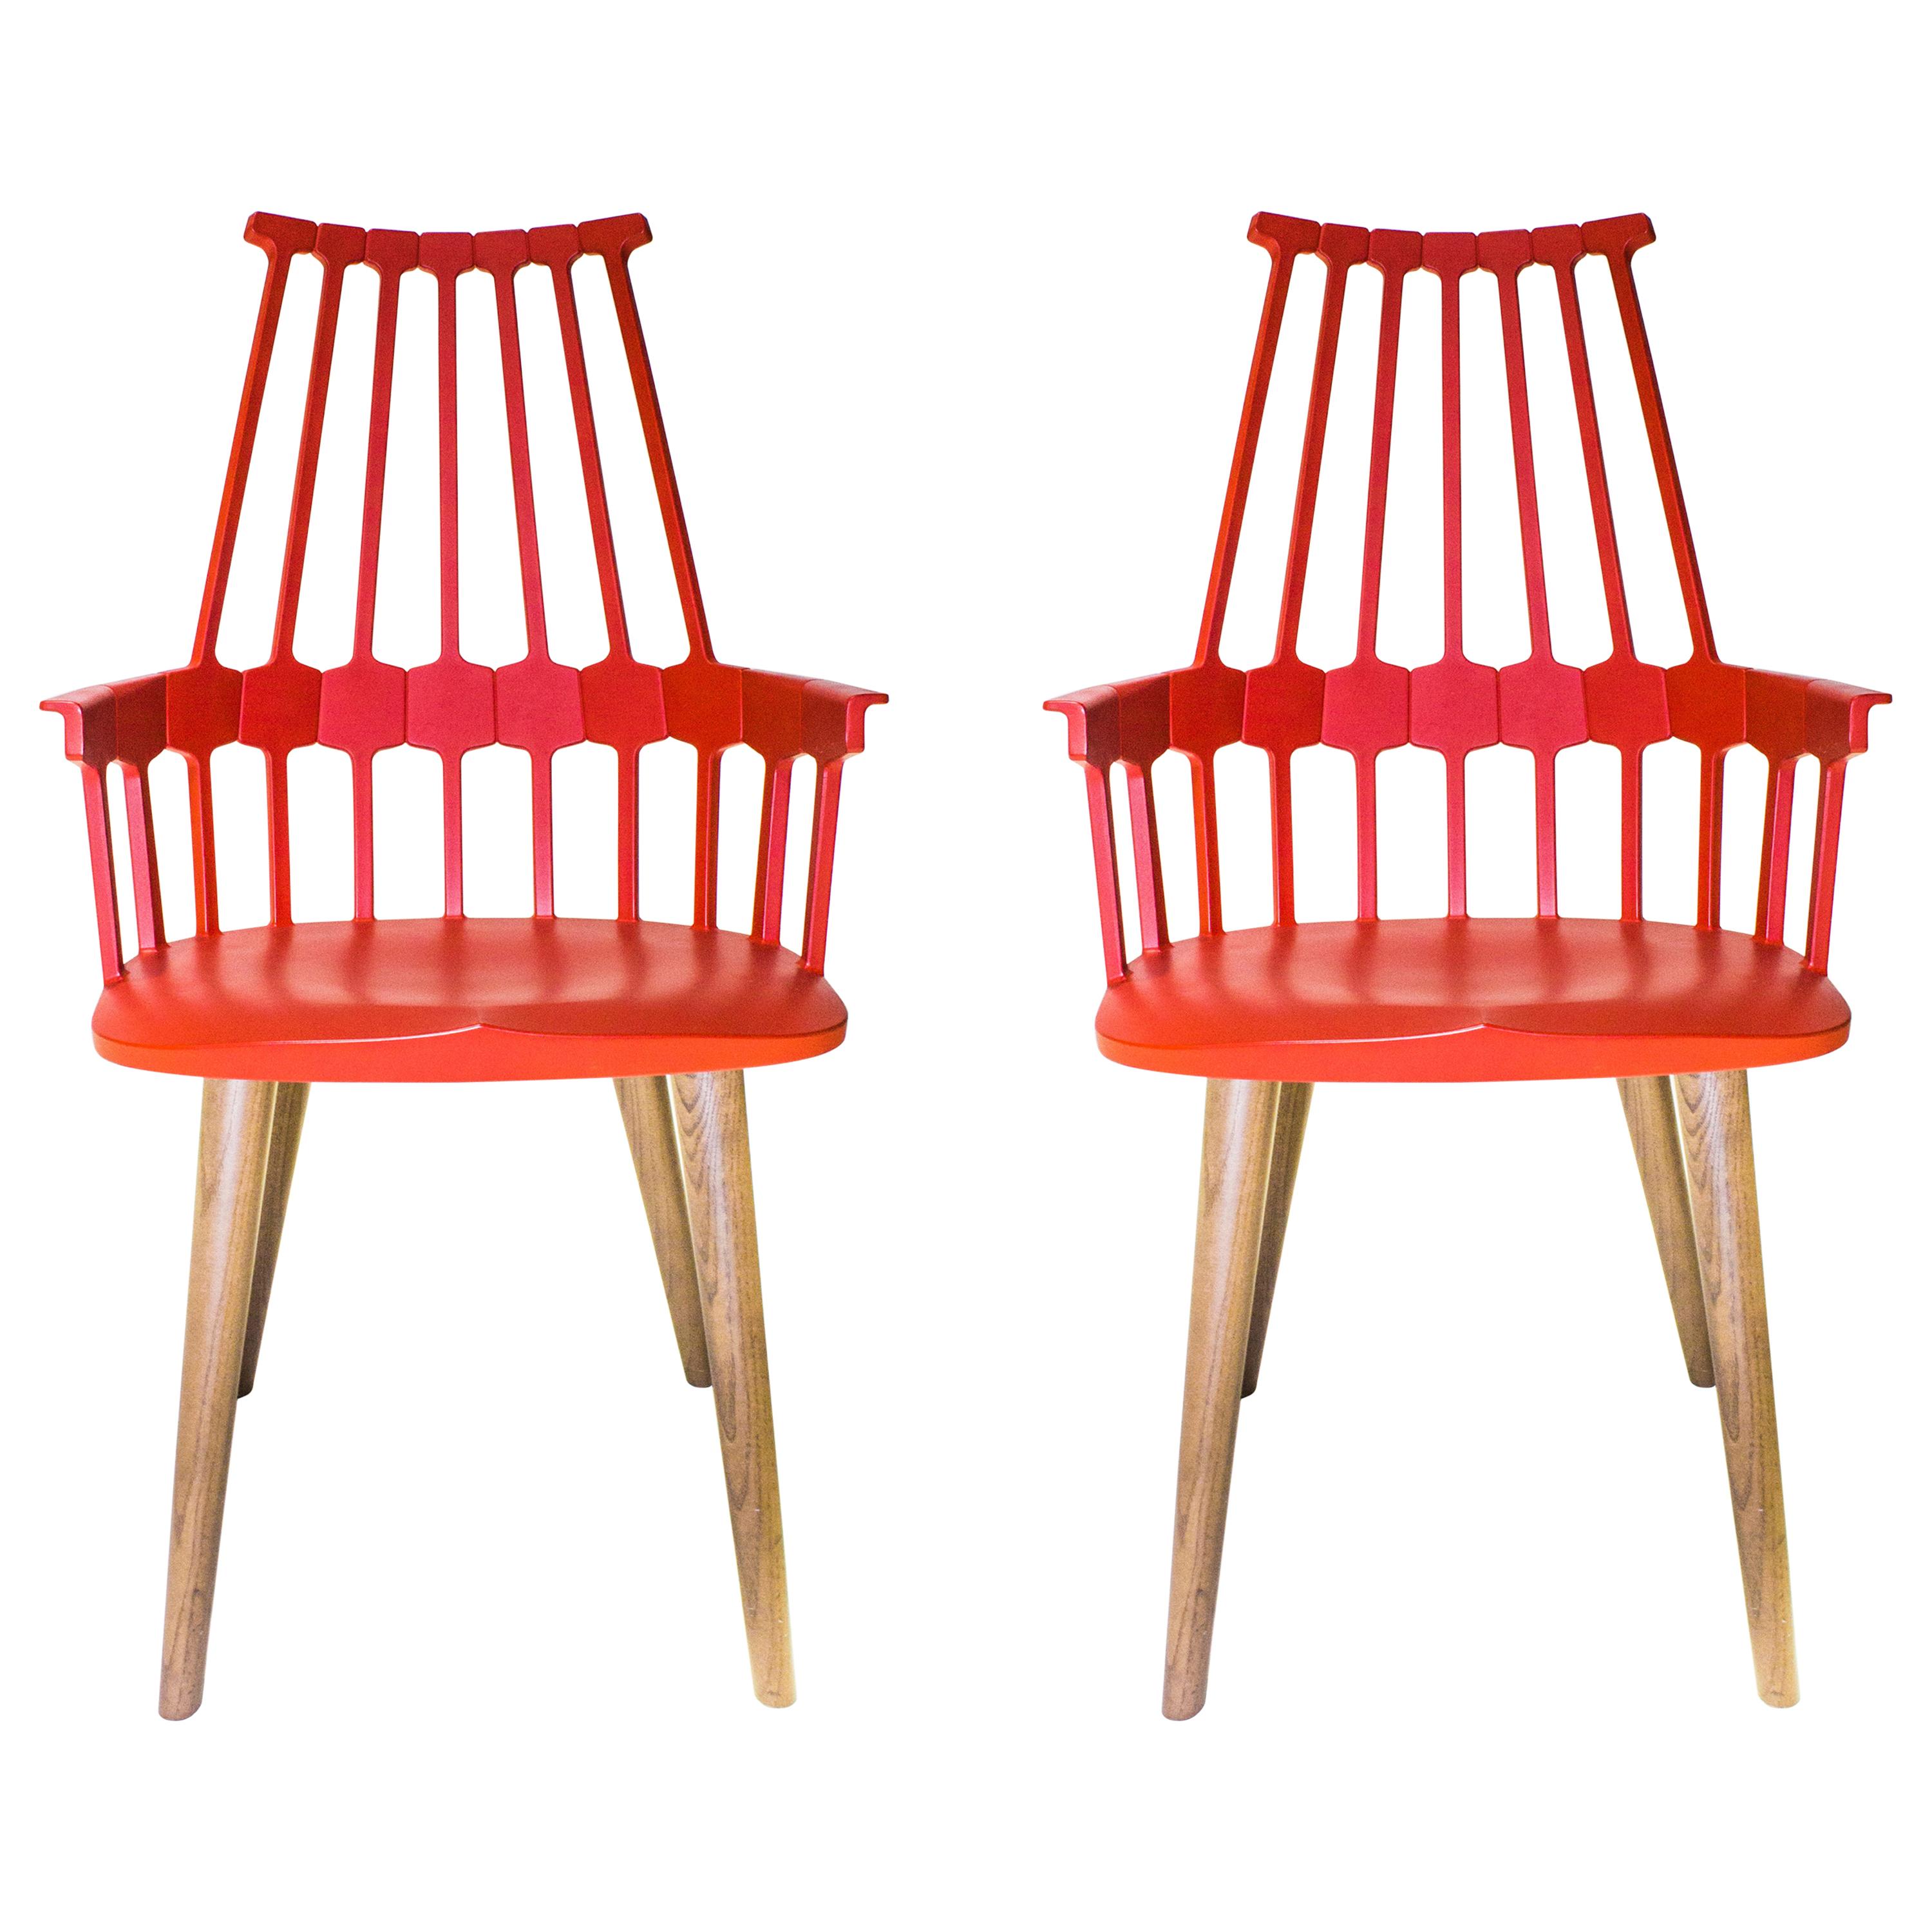 Set of 2 Kartell Comback Chairs in Orange Red with Oak Legs by Patricia Urquiola